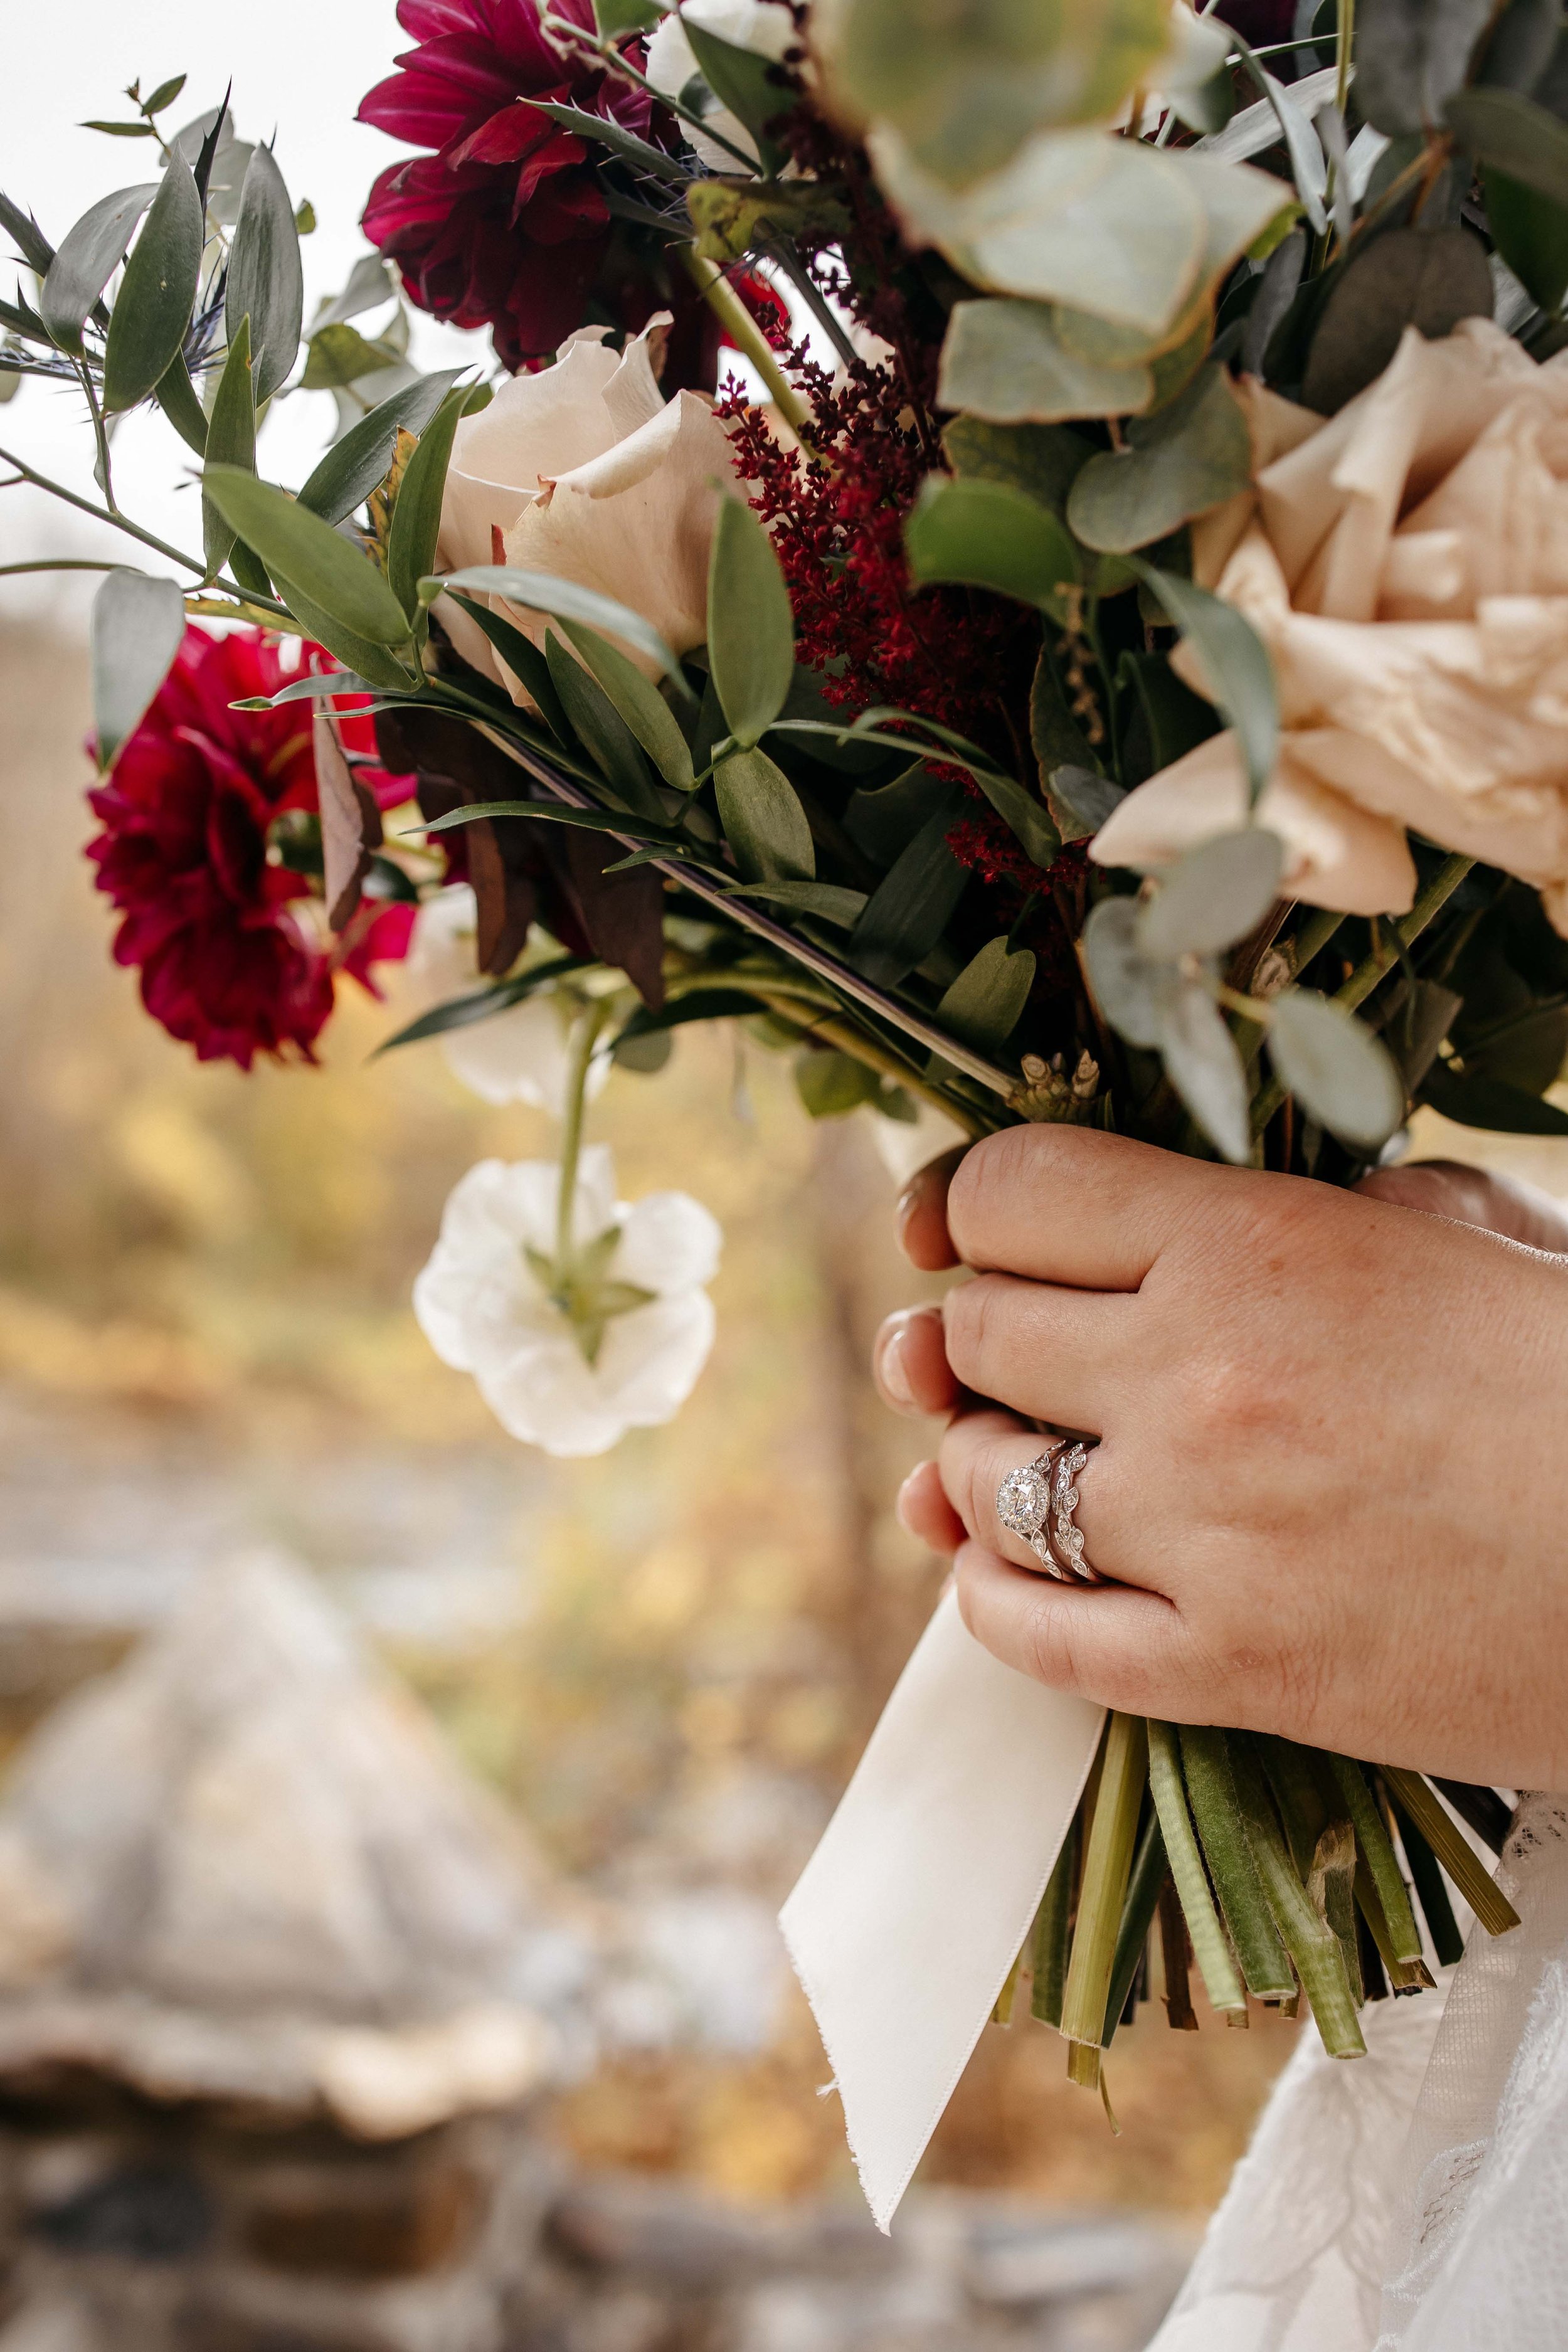 A close up of a bouquet and her wedding ring.